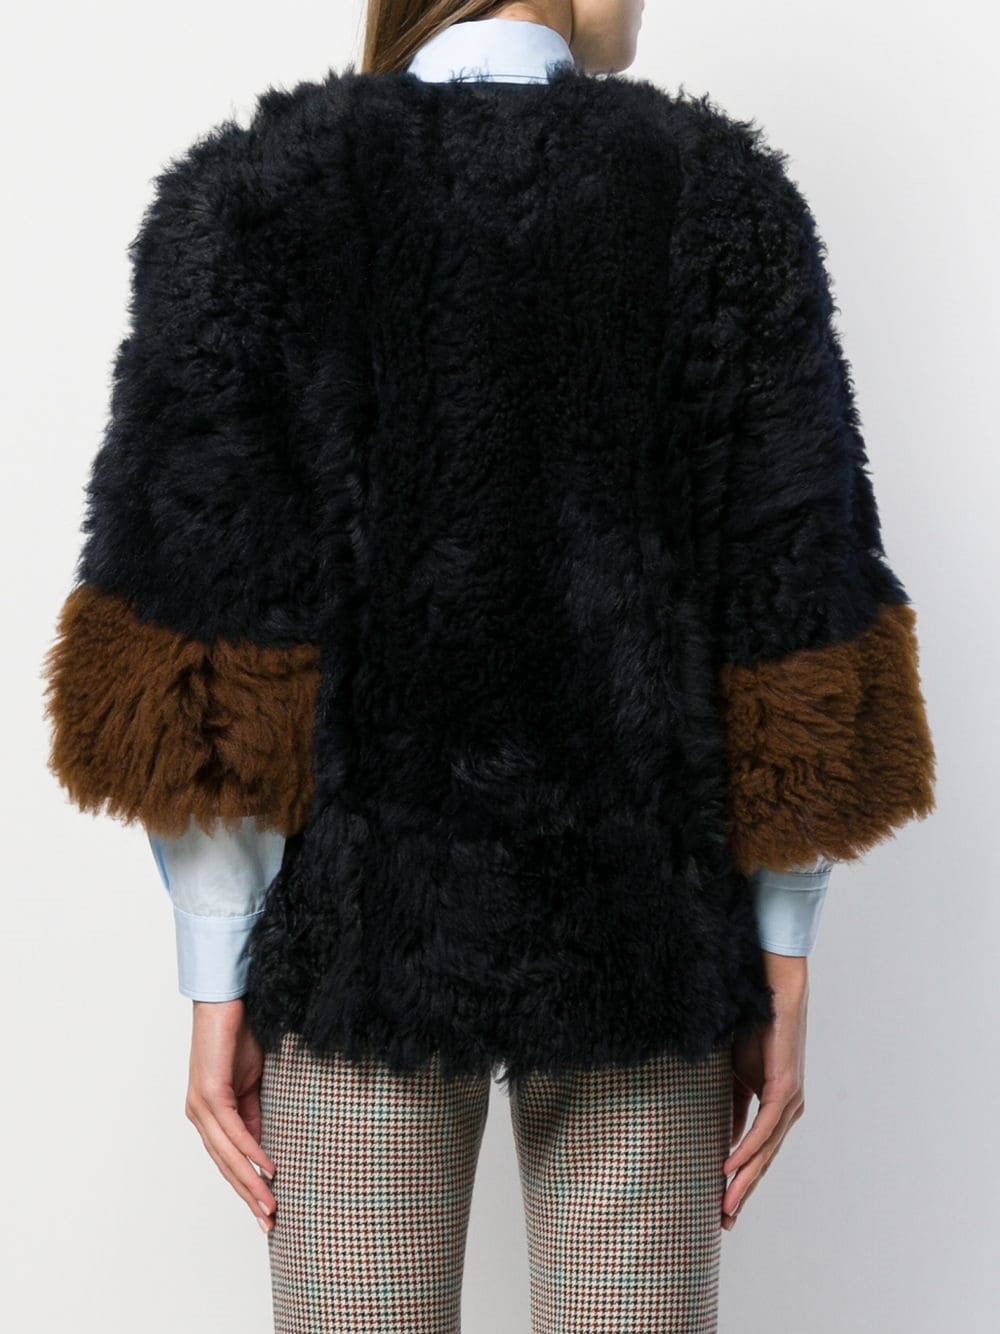 marni REVERSIBLE LEATHER & FAUX FUR JACKET available on montiboutique